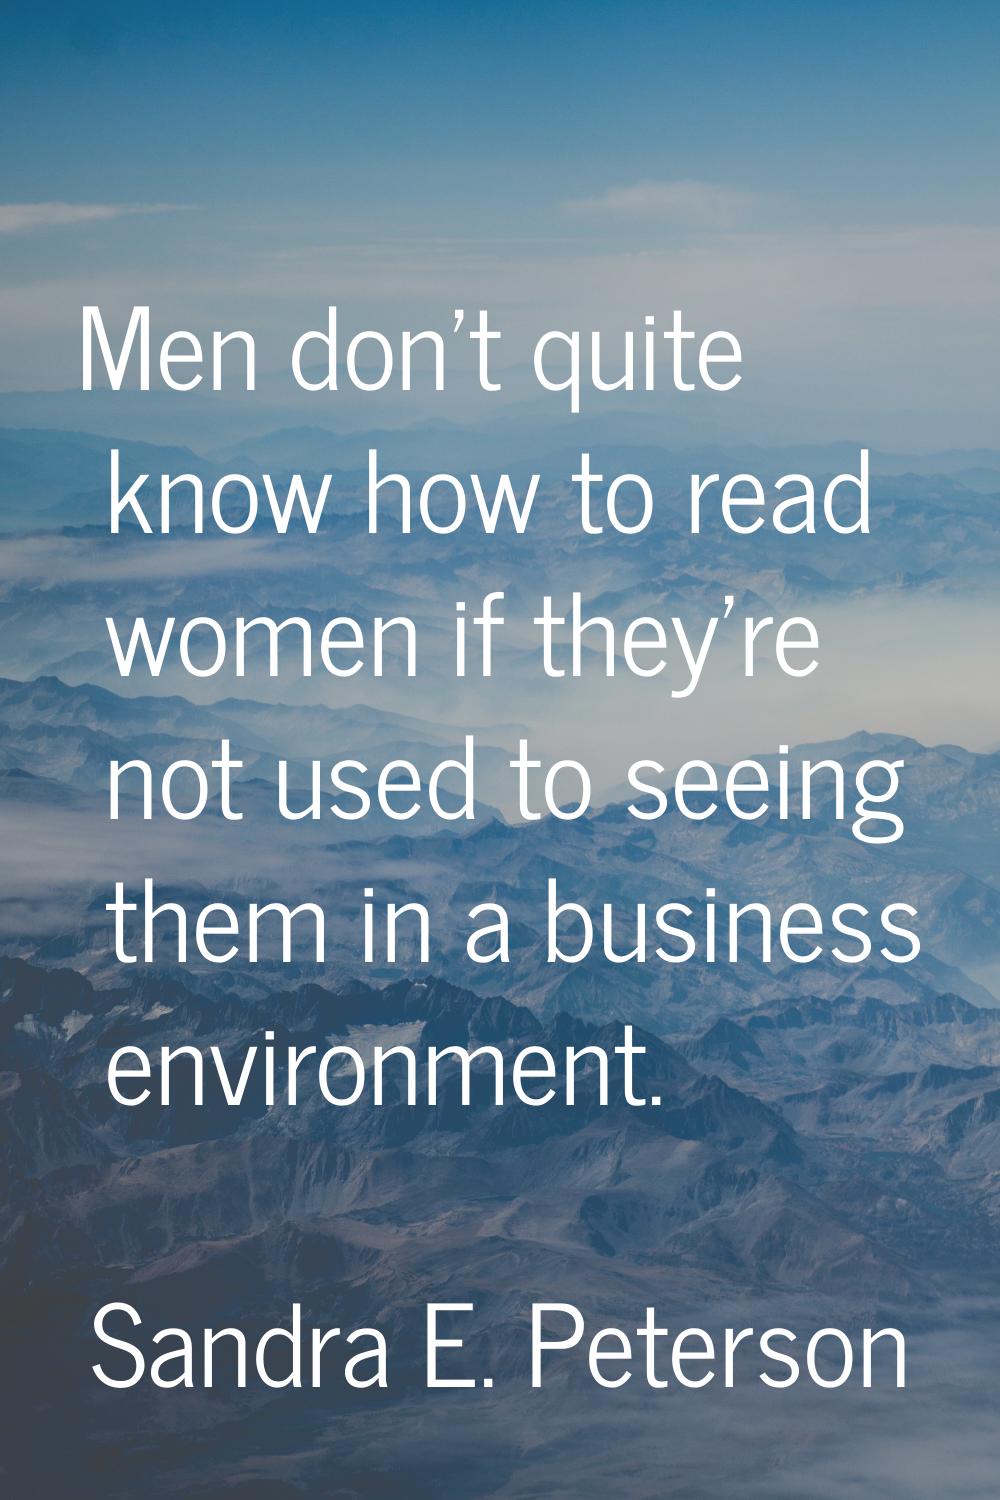 Men don't quite know how to read women if they're not used to seeing them in a business environment